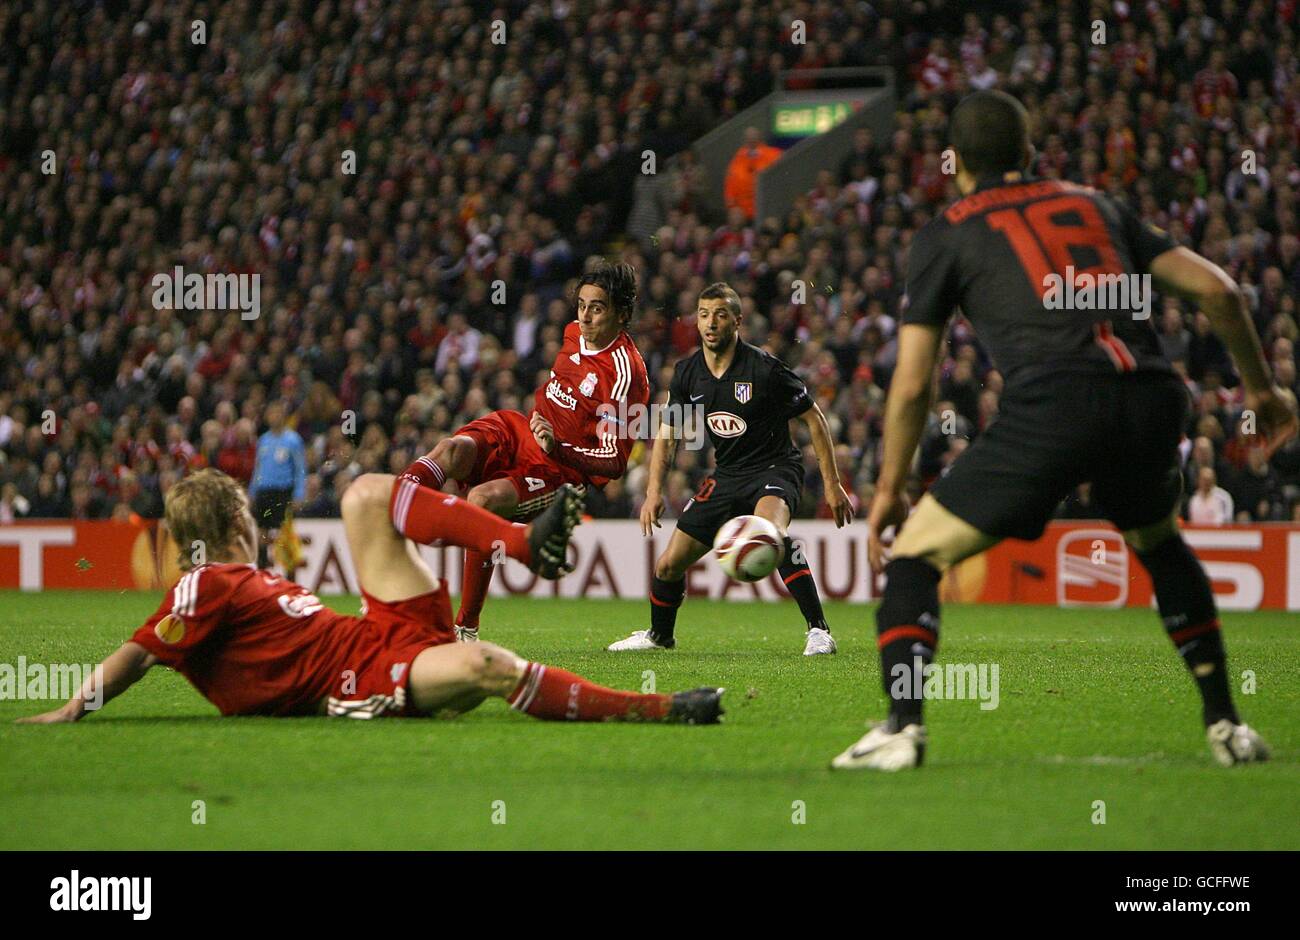 Soccer - UEFA Europa League - Semi Final - Second Leg - Liverpool v Atletico Madrid - Anfield. Liverpool's Alberto Aquilani (centre) scores his sides first goal of the game Stock Photo